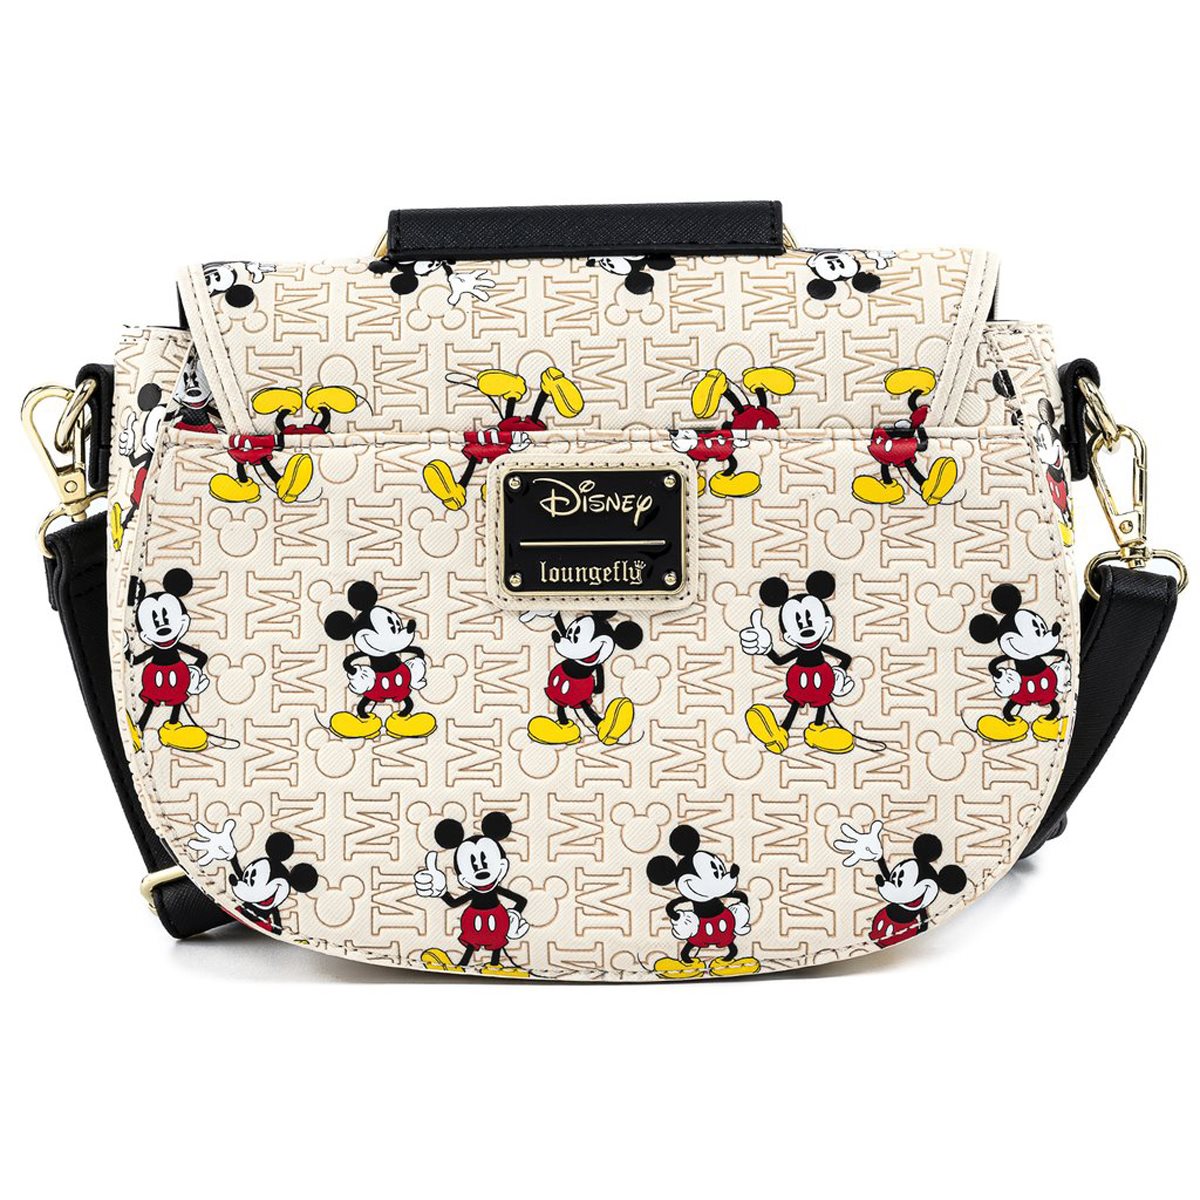 Buckle-Down Disney Mickey Mouse Action Poses Confetti Collage Crossbody